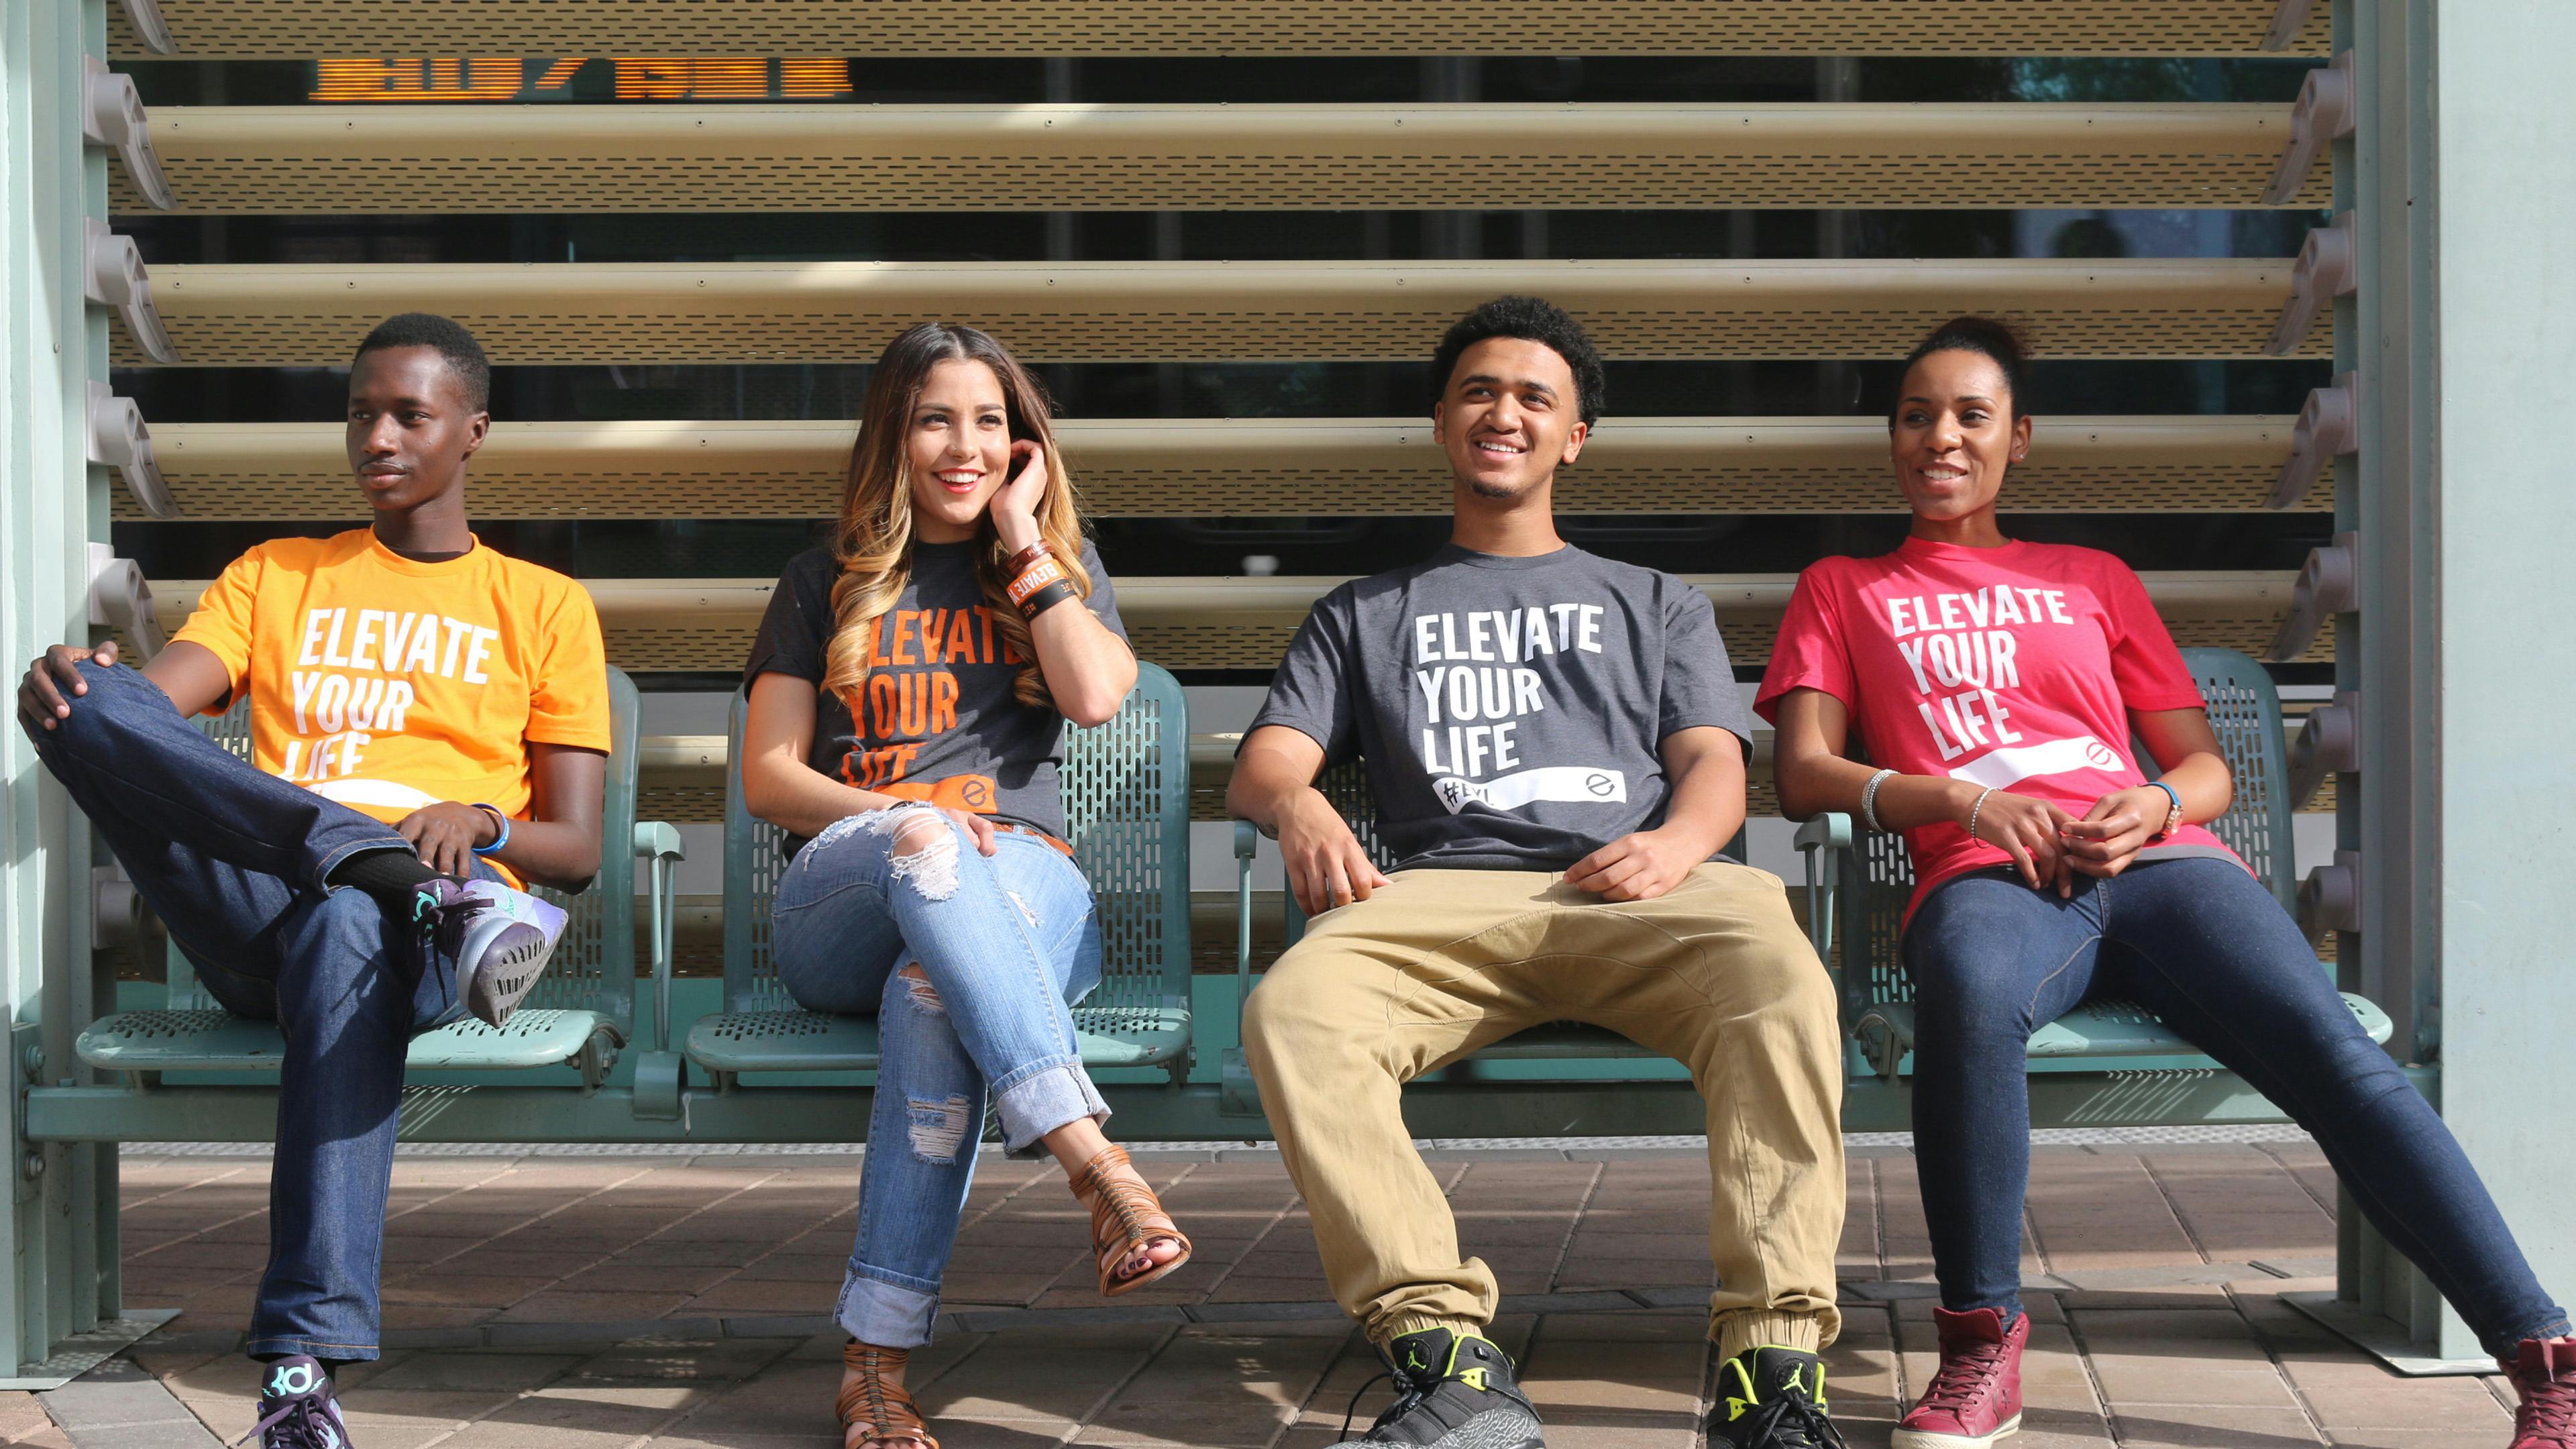 A group of people, 2 guys and 2 girls, sitting on a bus bench wearing different color Elevate Your Life shirts, all looking in different directions